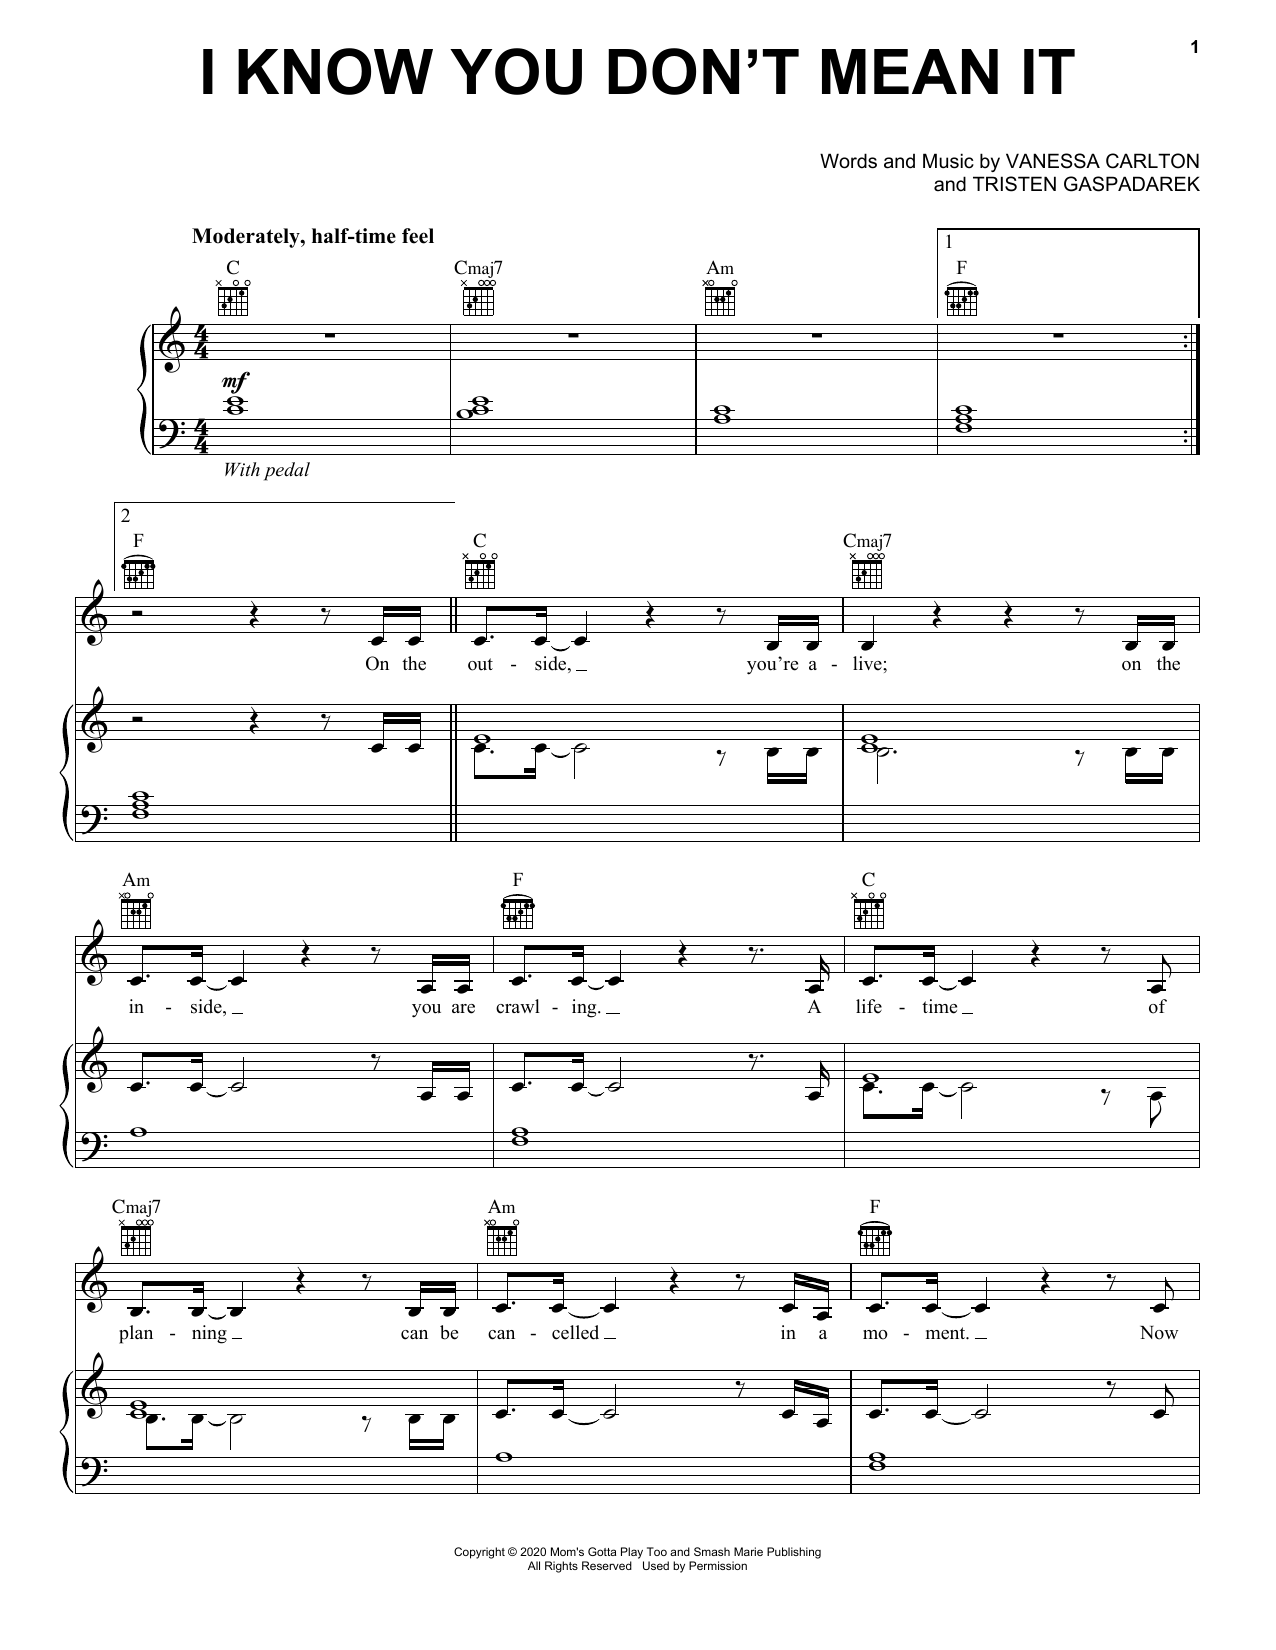 Download Vanessa Carlton I Know You Don't Mean It Sheet Music